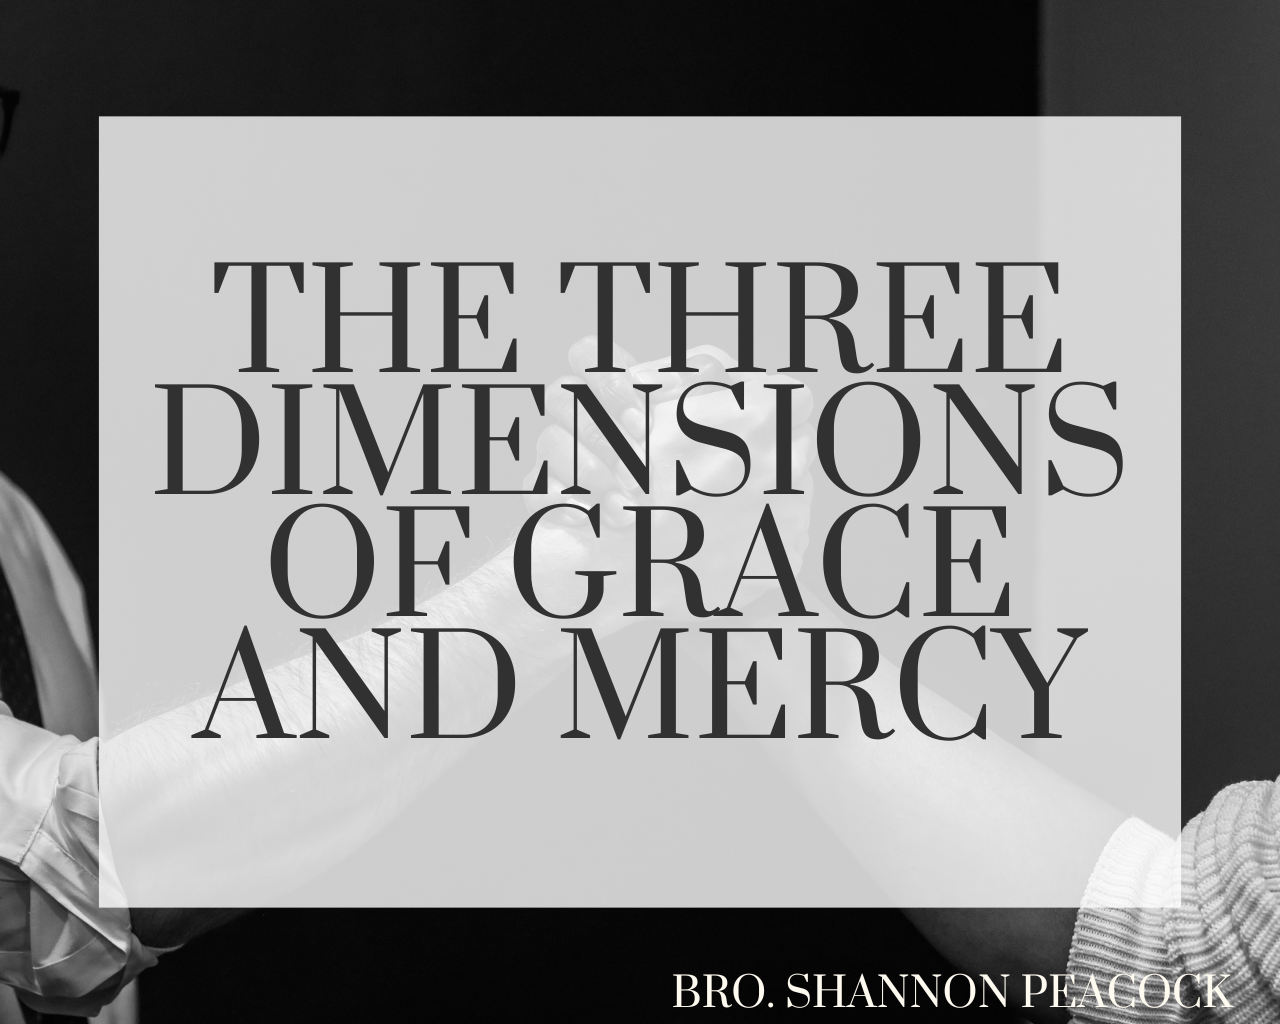 The Three Dimensions of Grace and Mercy